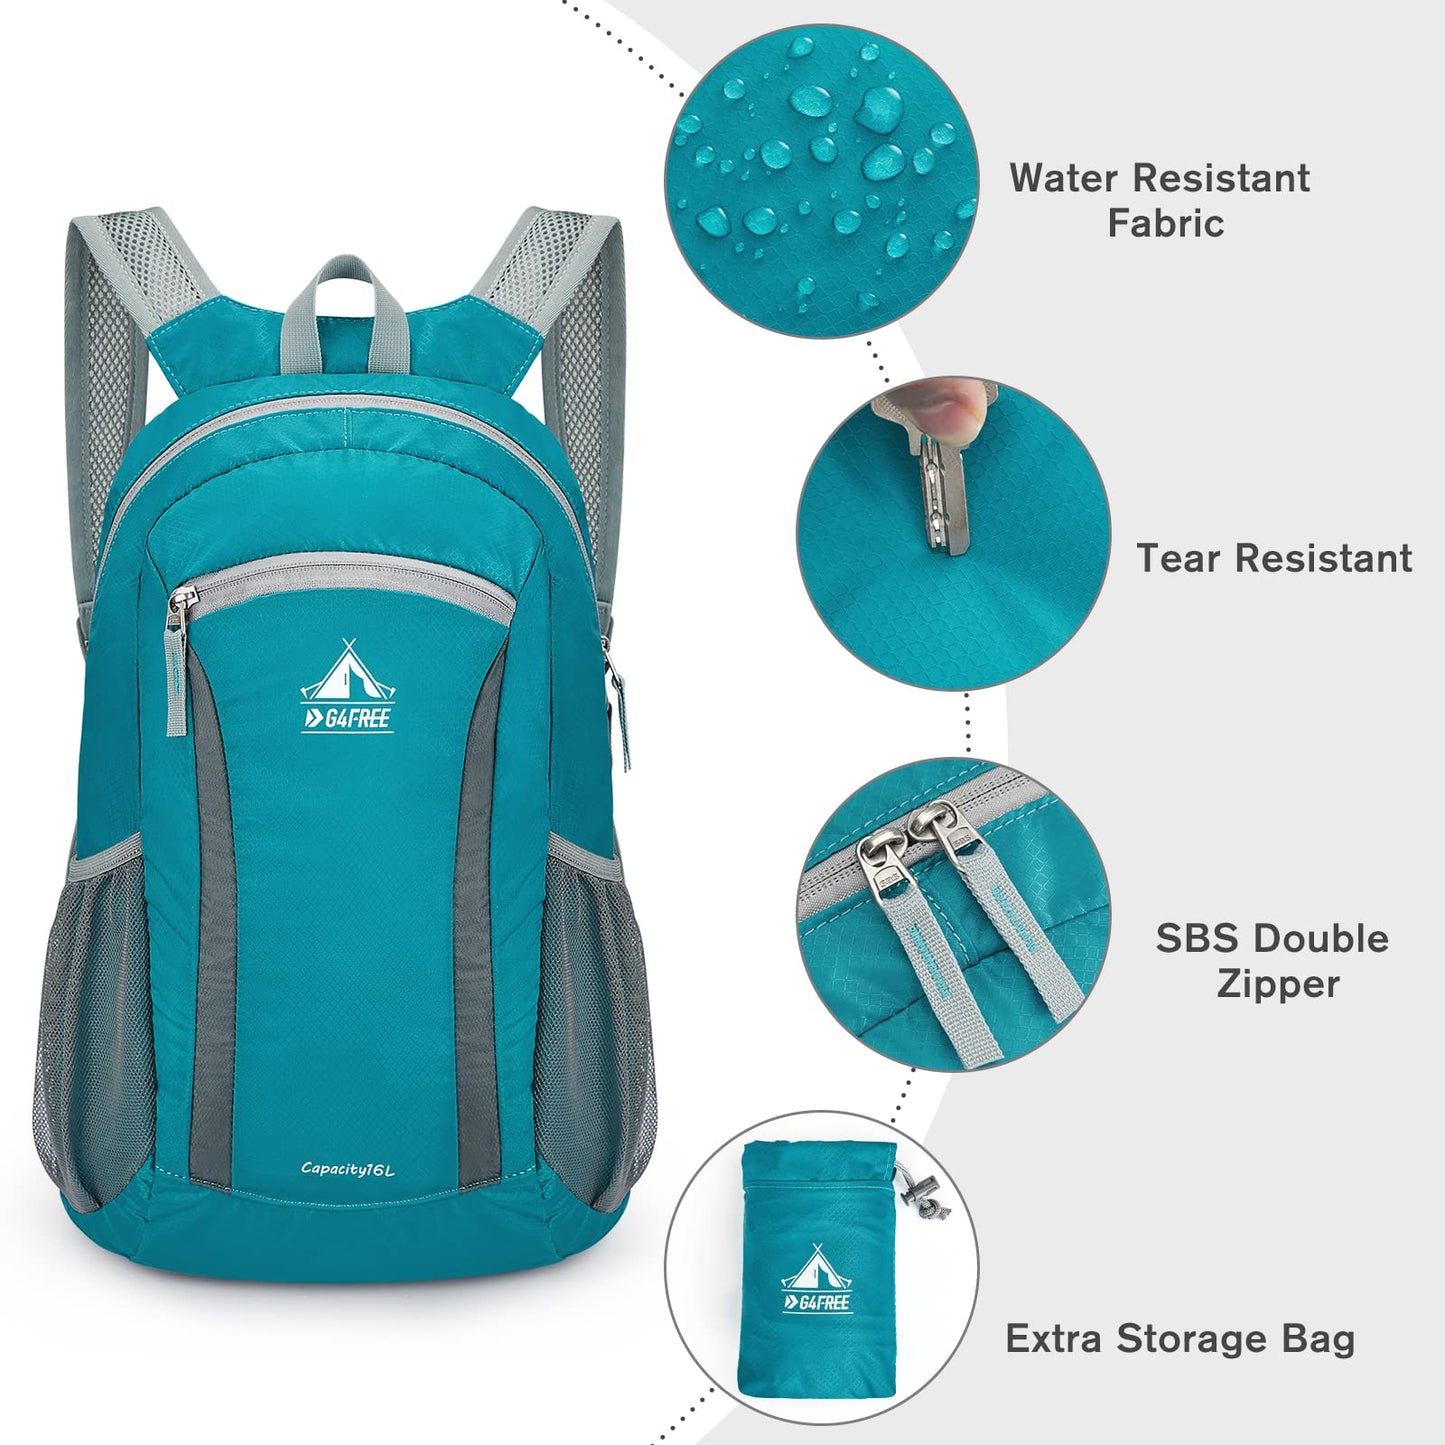 G4Free Hiking Daypack Water Resistant Lightweight Packable Backpack